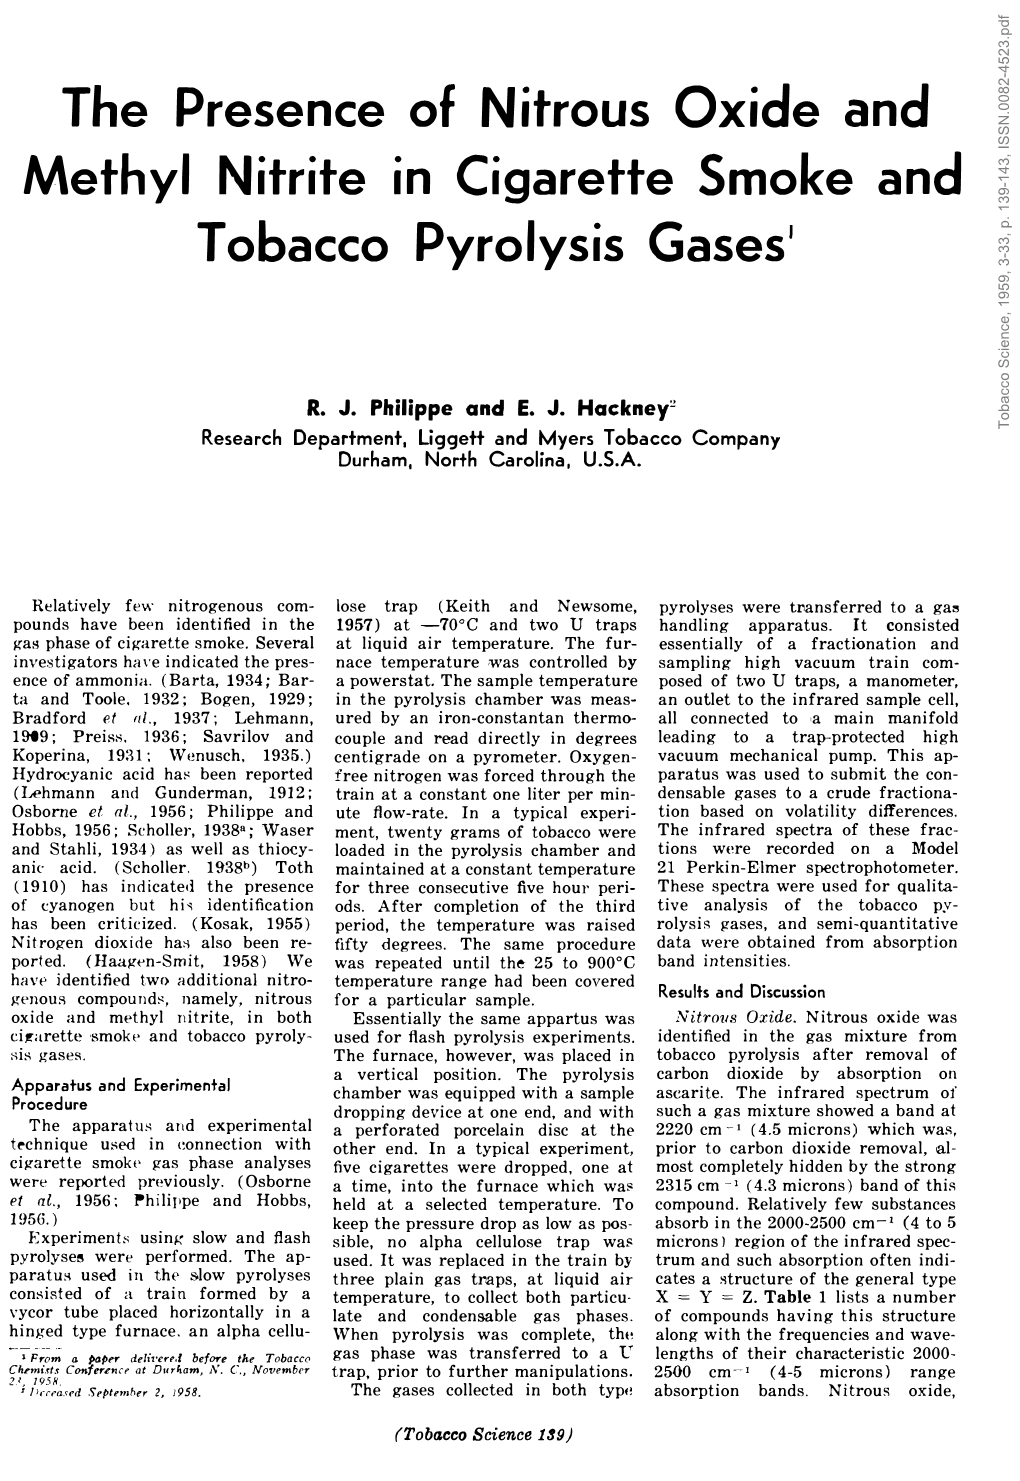 The Presence of Nitrous Oxide and Methyl Nitrite in Cigarette Smoke and Tobacco Pyrolysis Gases'